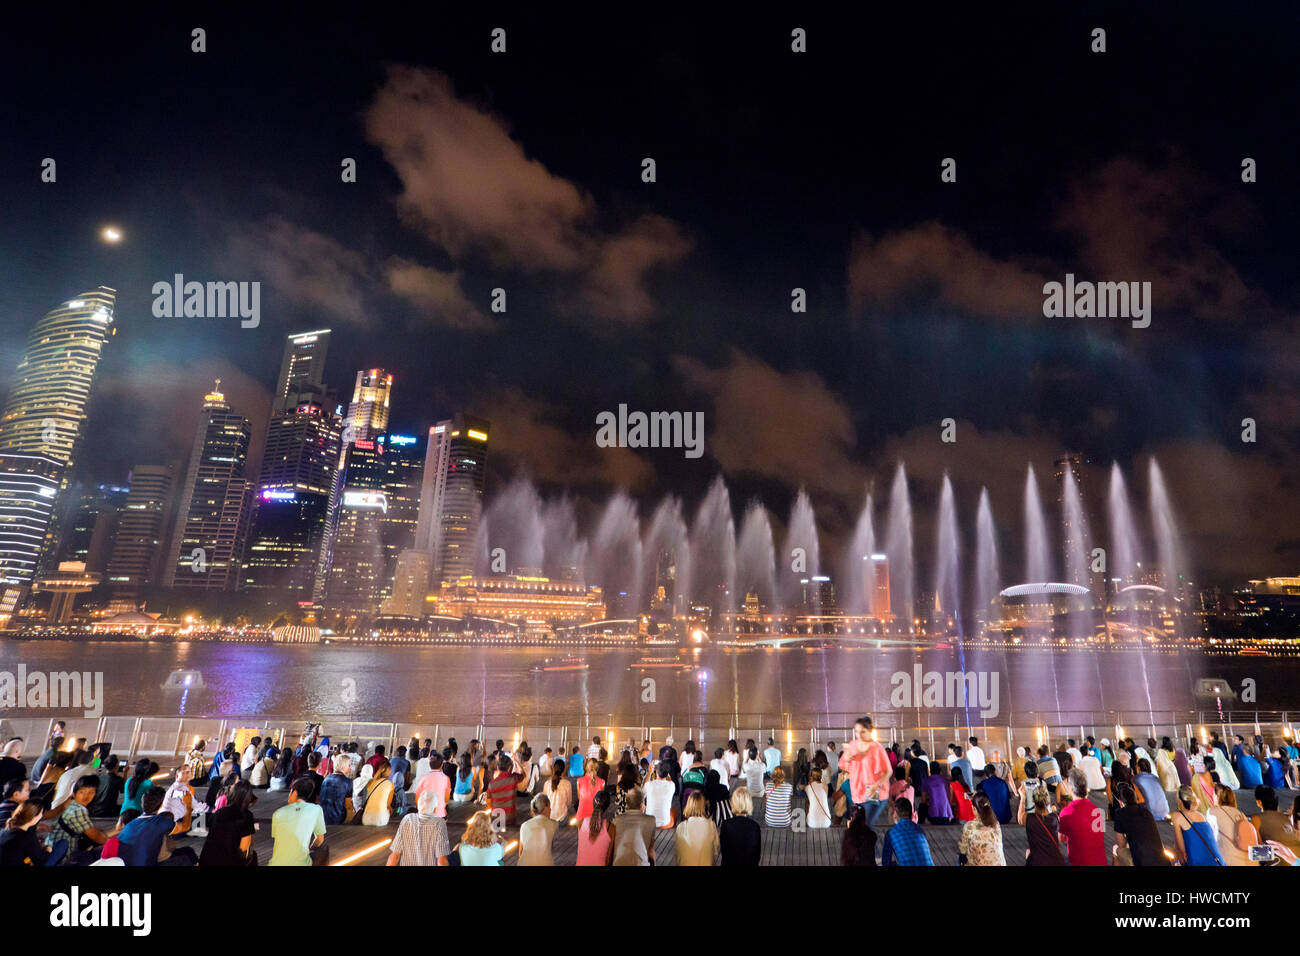 Horizontal view of the spectators at the Wonder Full light and sound show at night in Singapore. Stock Photo